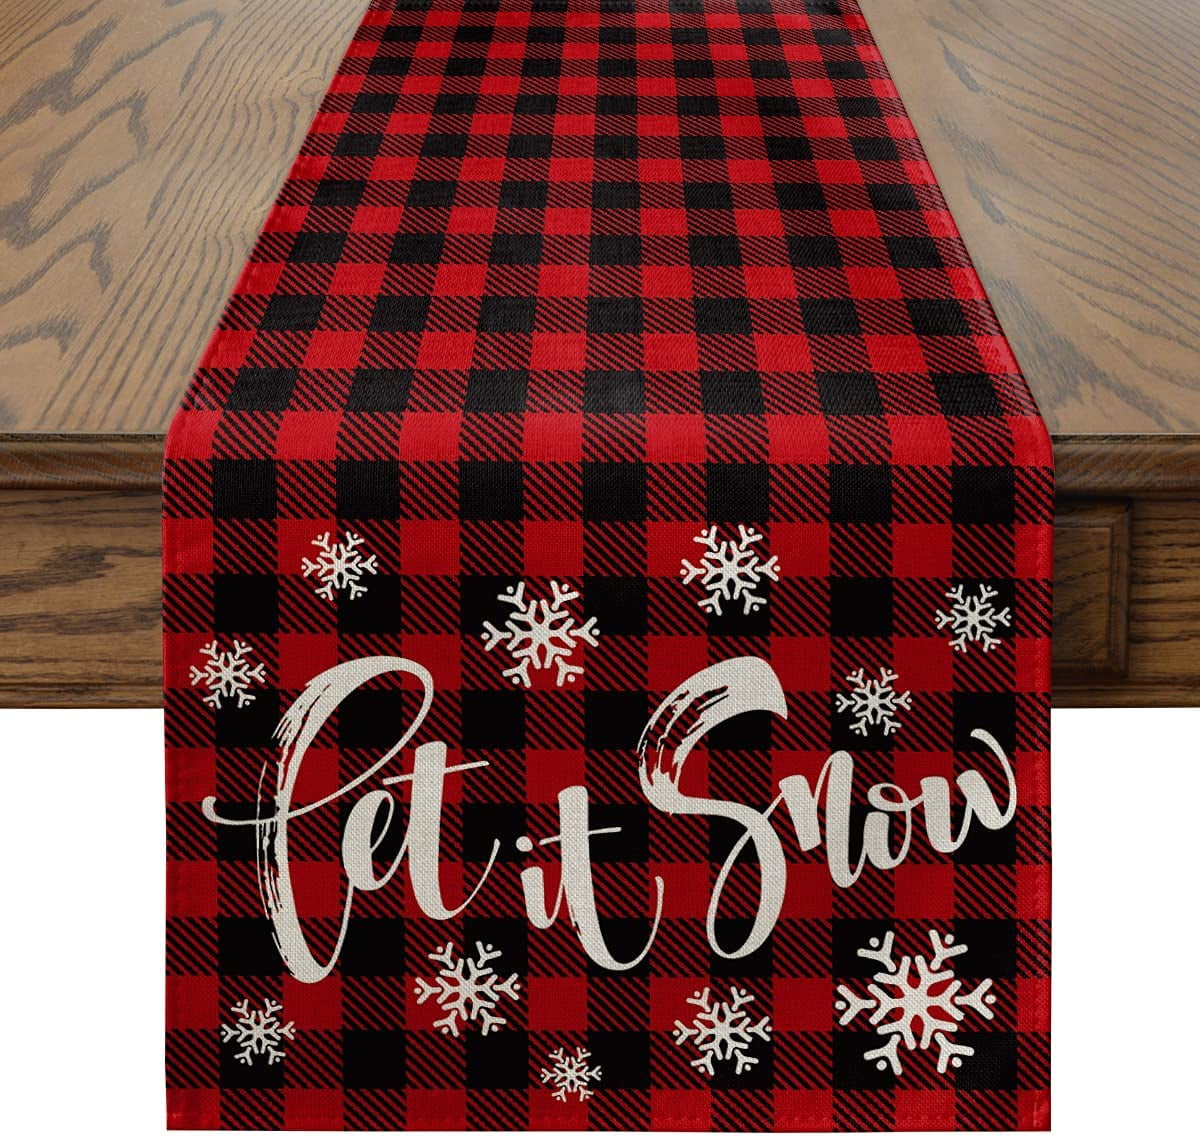 Seasonal Spring Holiday Kitchen Dining Table Runner for Home Party Decor 13 x 72 Inch Artoid Mode Buffalo Plaid Flower Truck Table Runner 